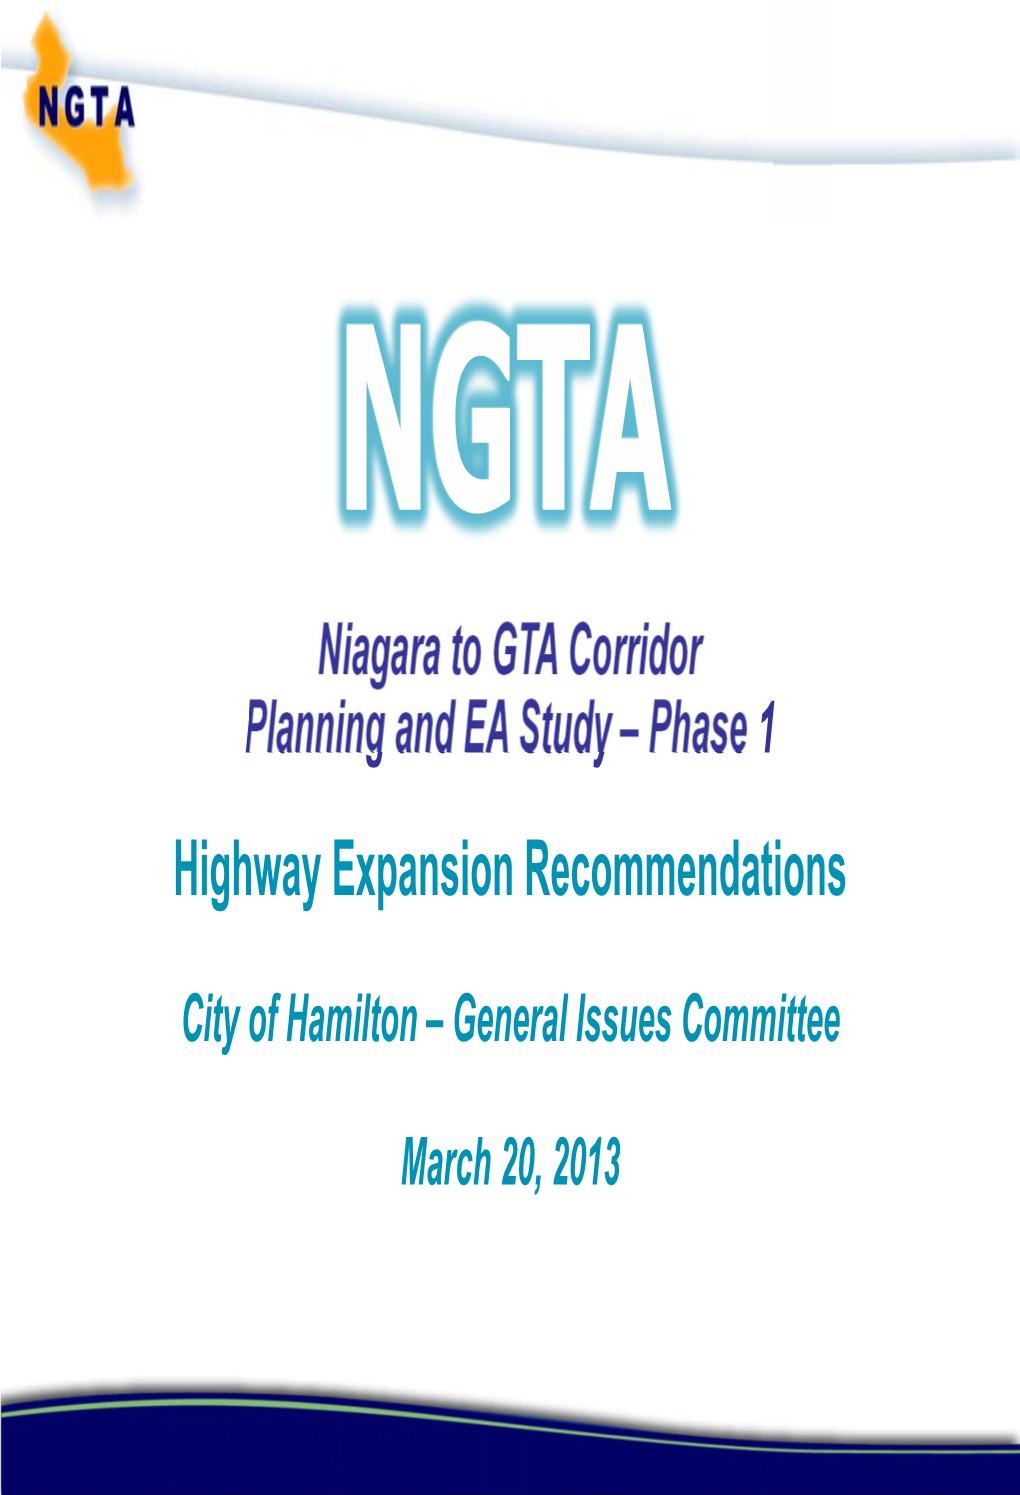 Highway Expansion Recommendations